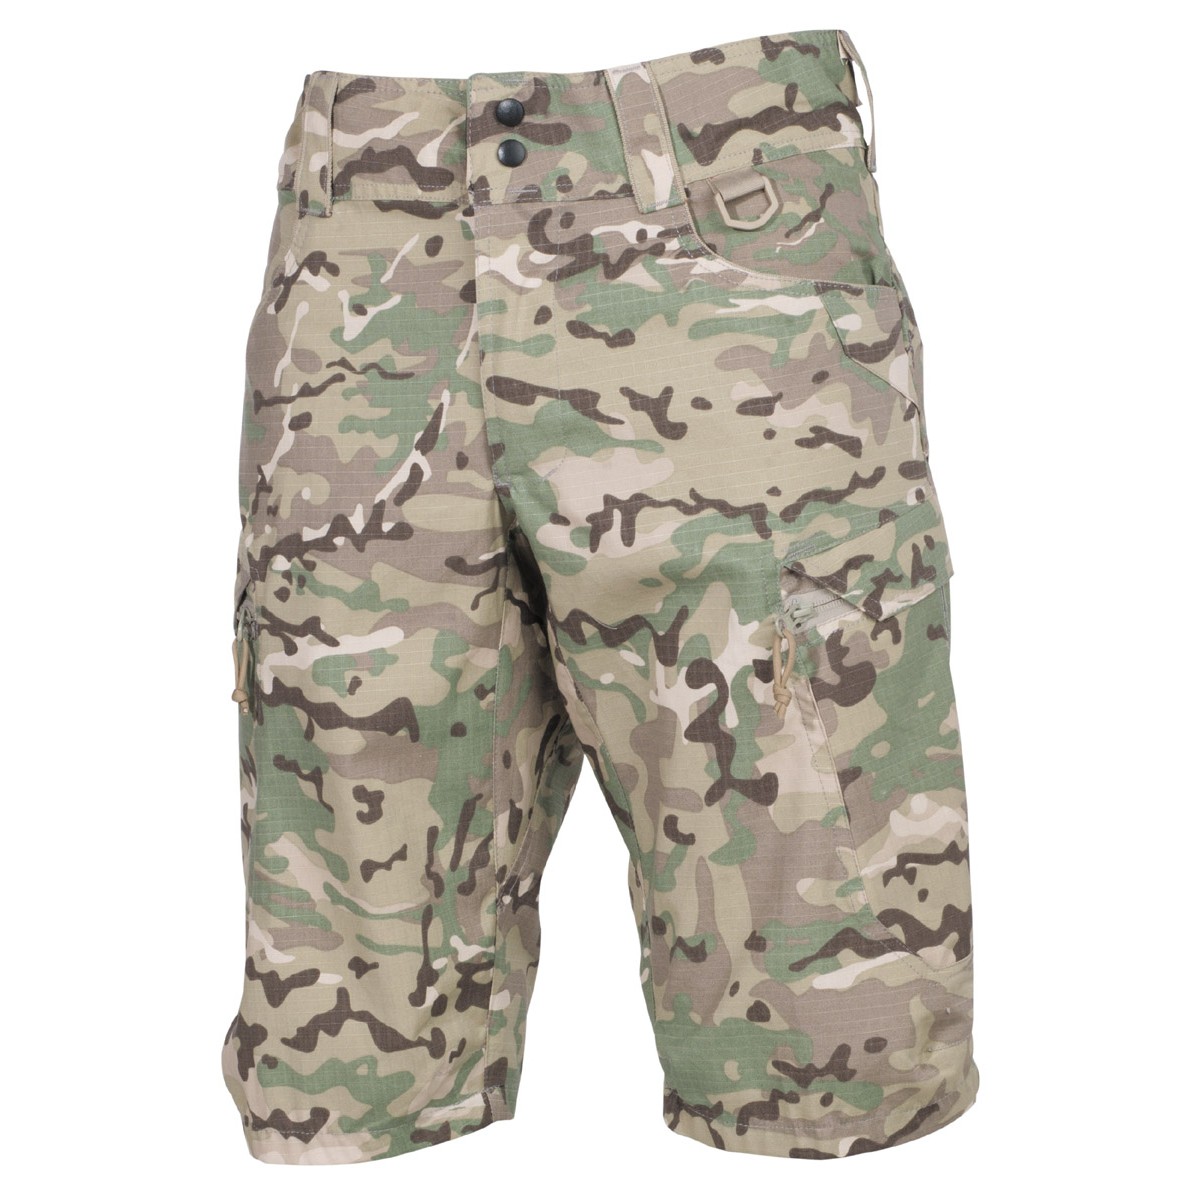 Professional Tactical Military Battle Army Shorts „Defense“ Rip Stop - Multicam